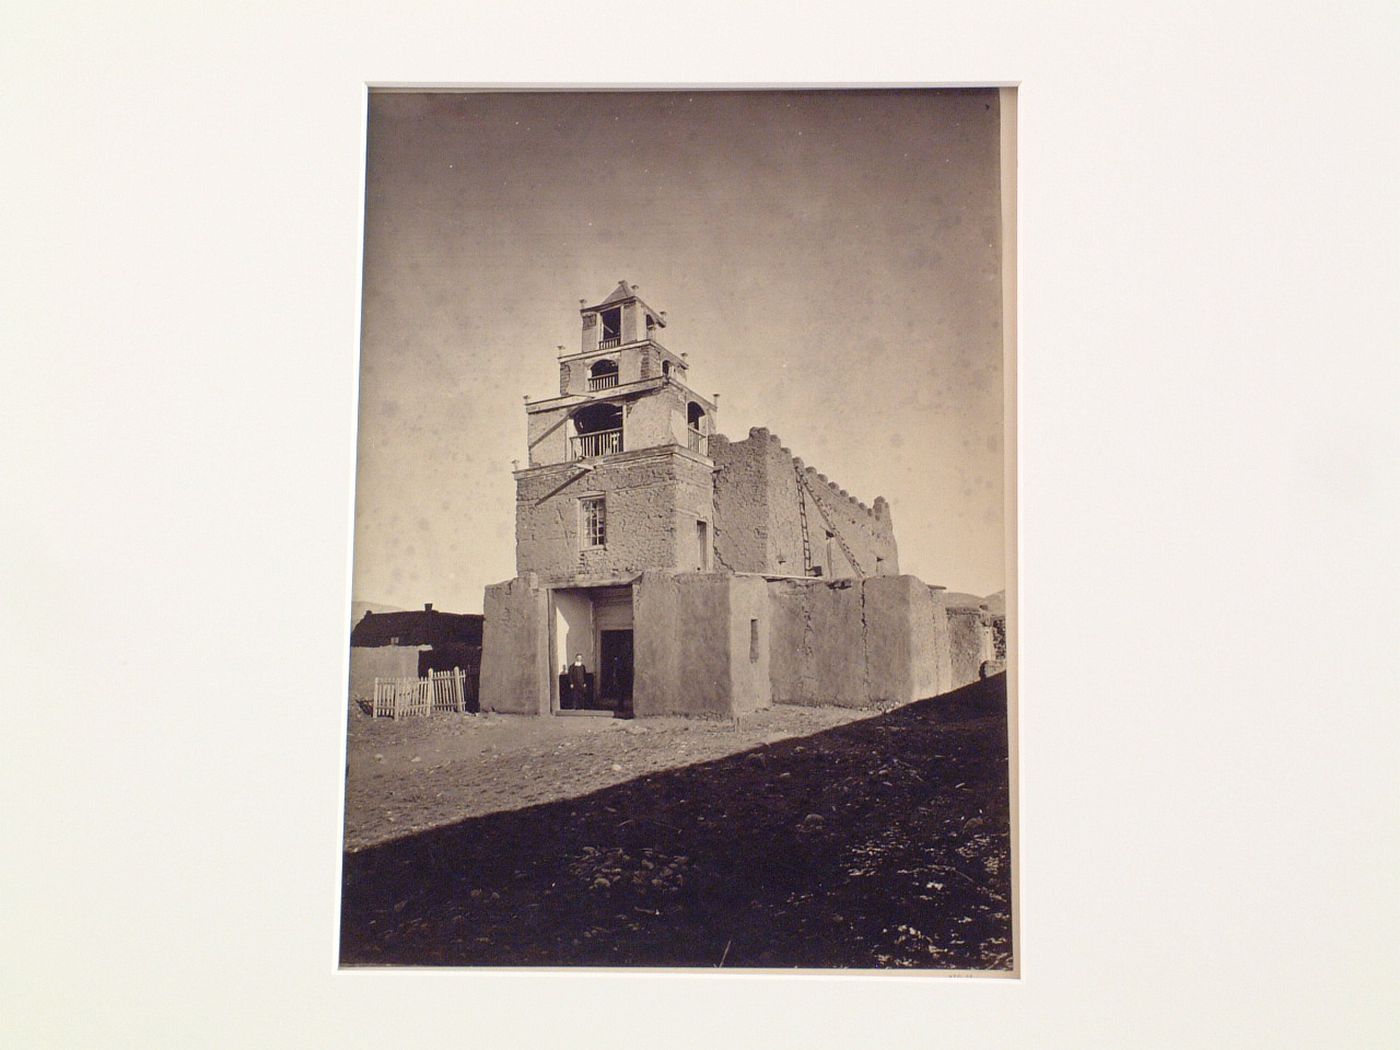 View of the Church of San Miguel with a priest in the doorway, Santa Fe, New Mexico, United States